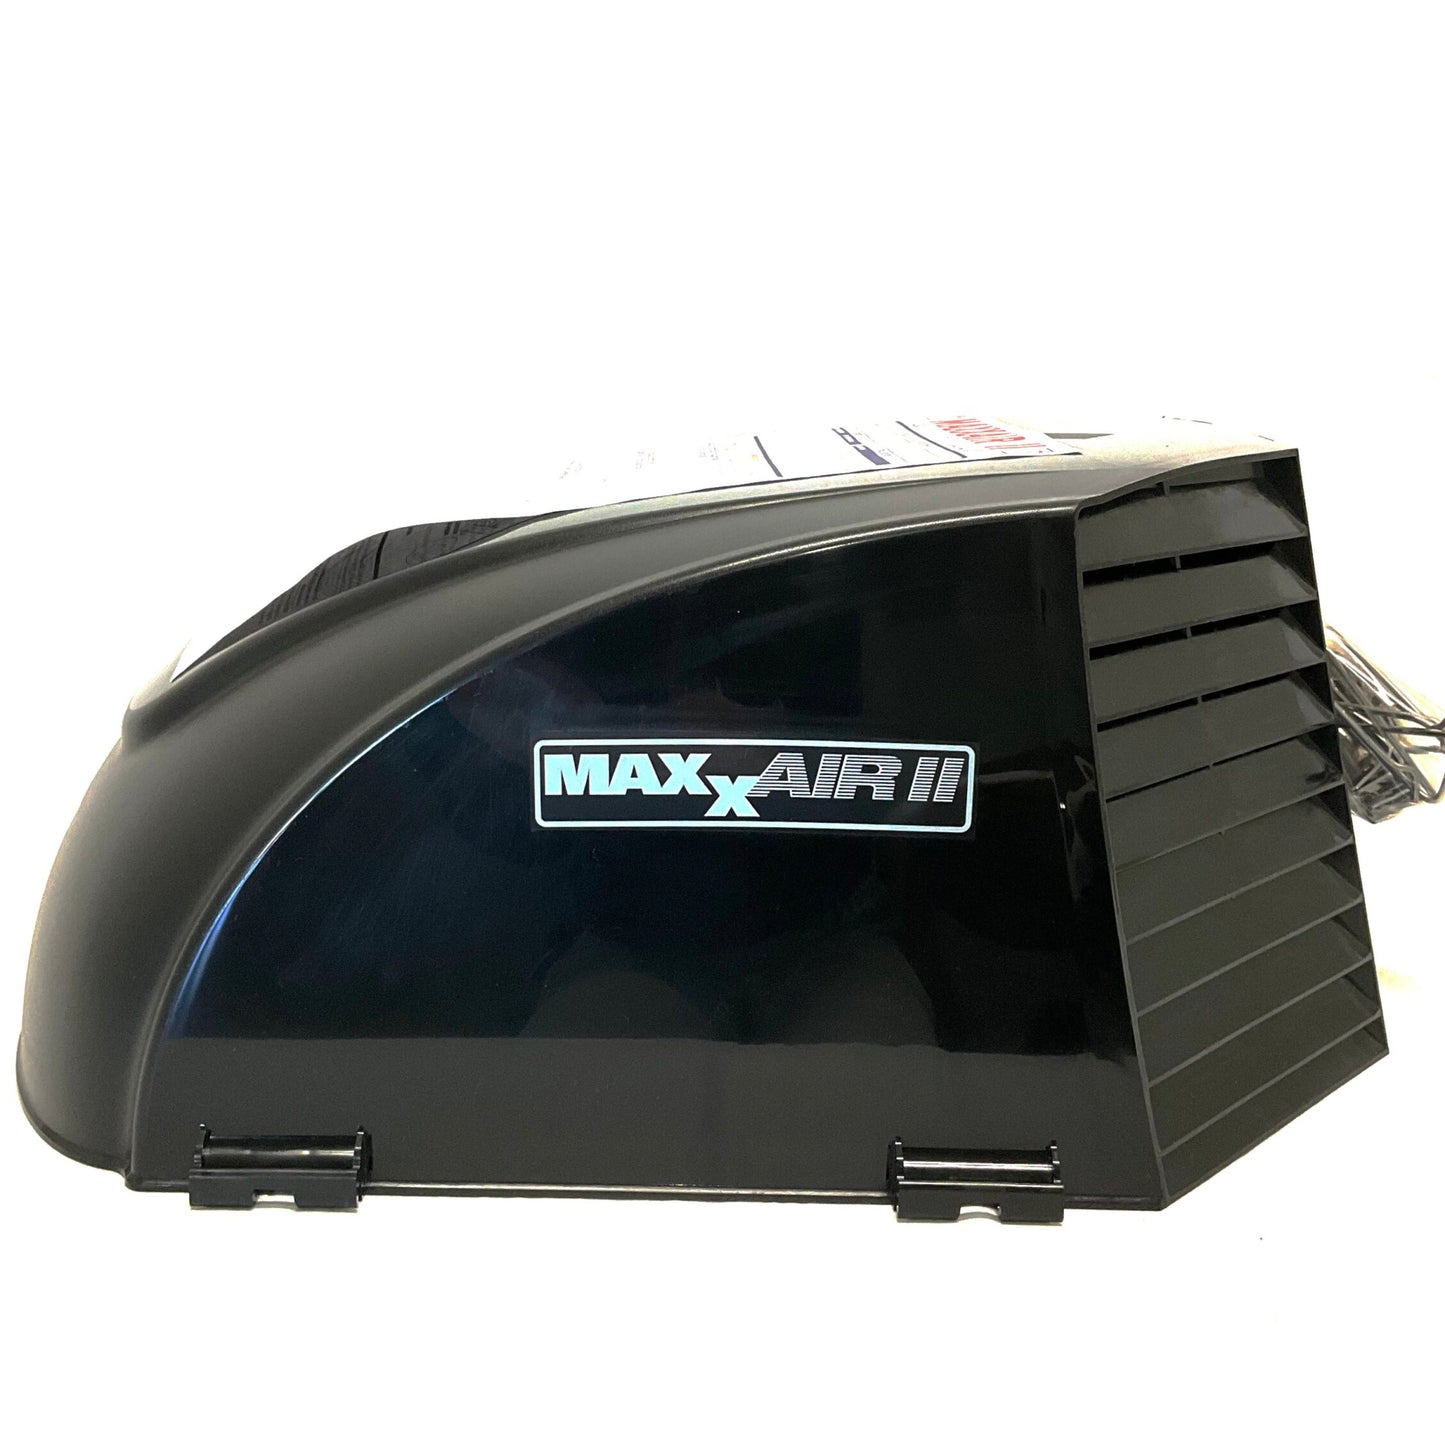 MaxxAir II - Roof Vent Cover